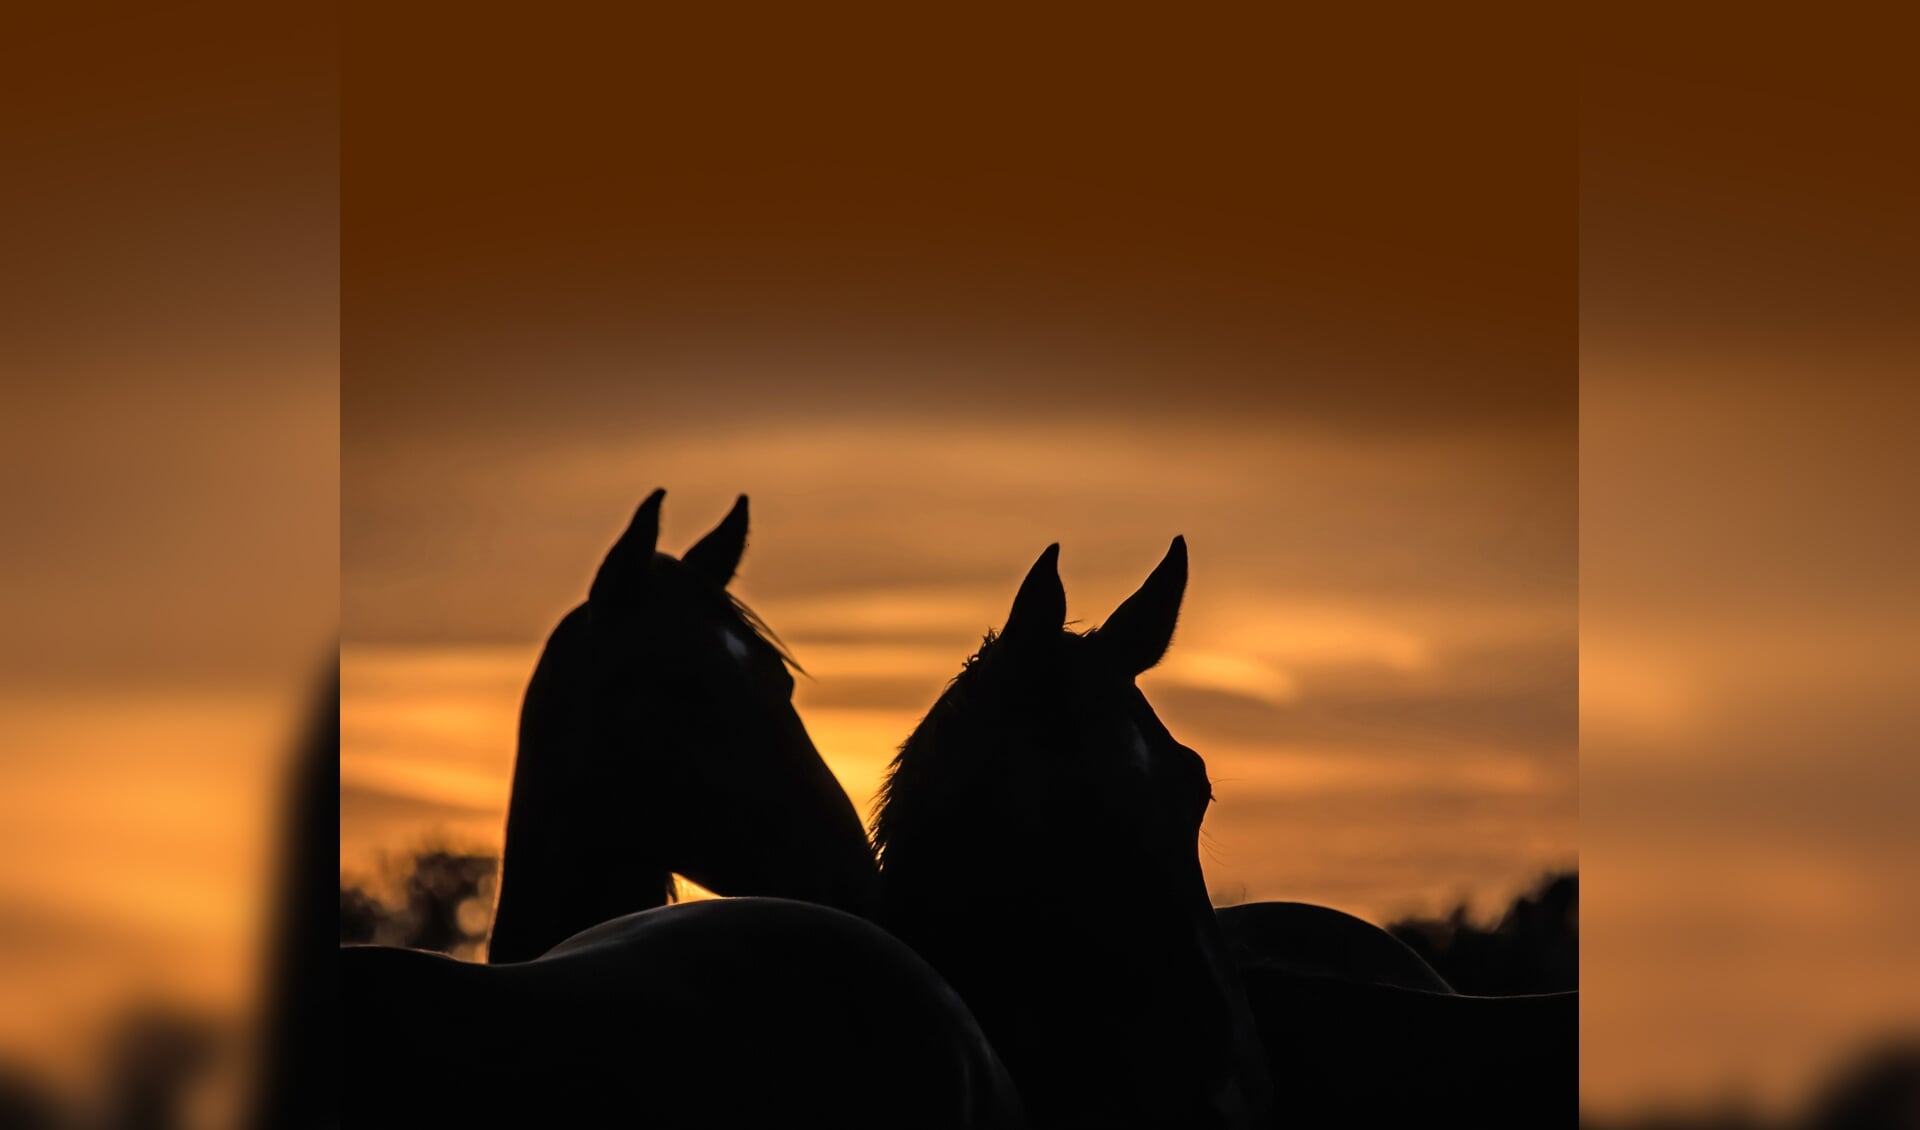 Horses at sunset on a summer evening